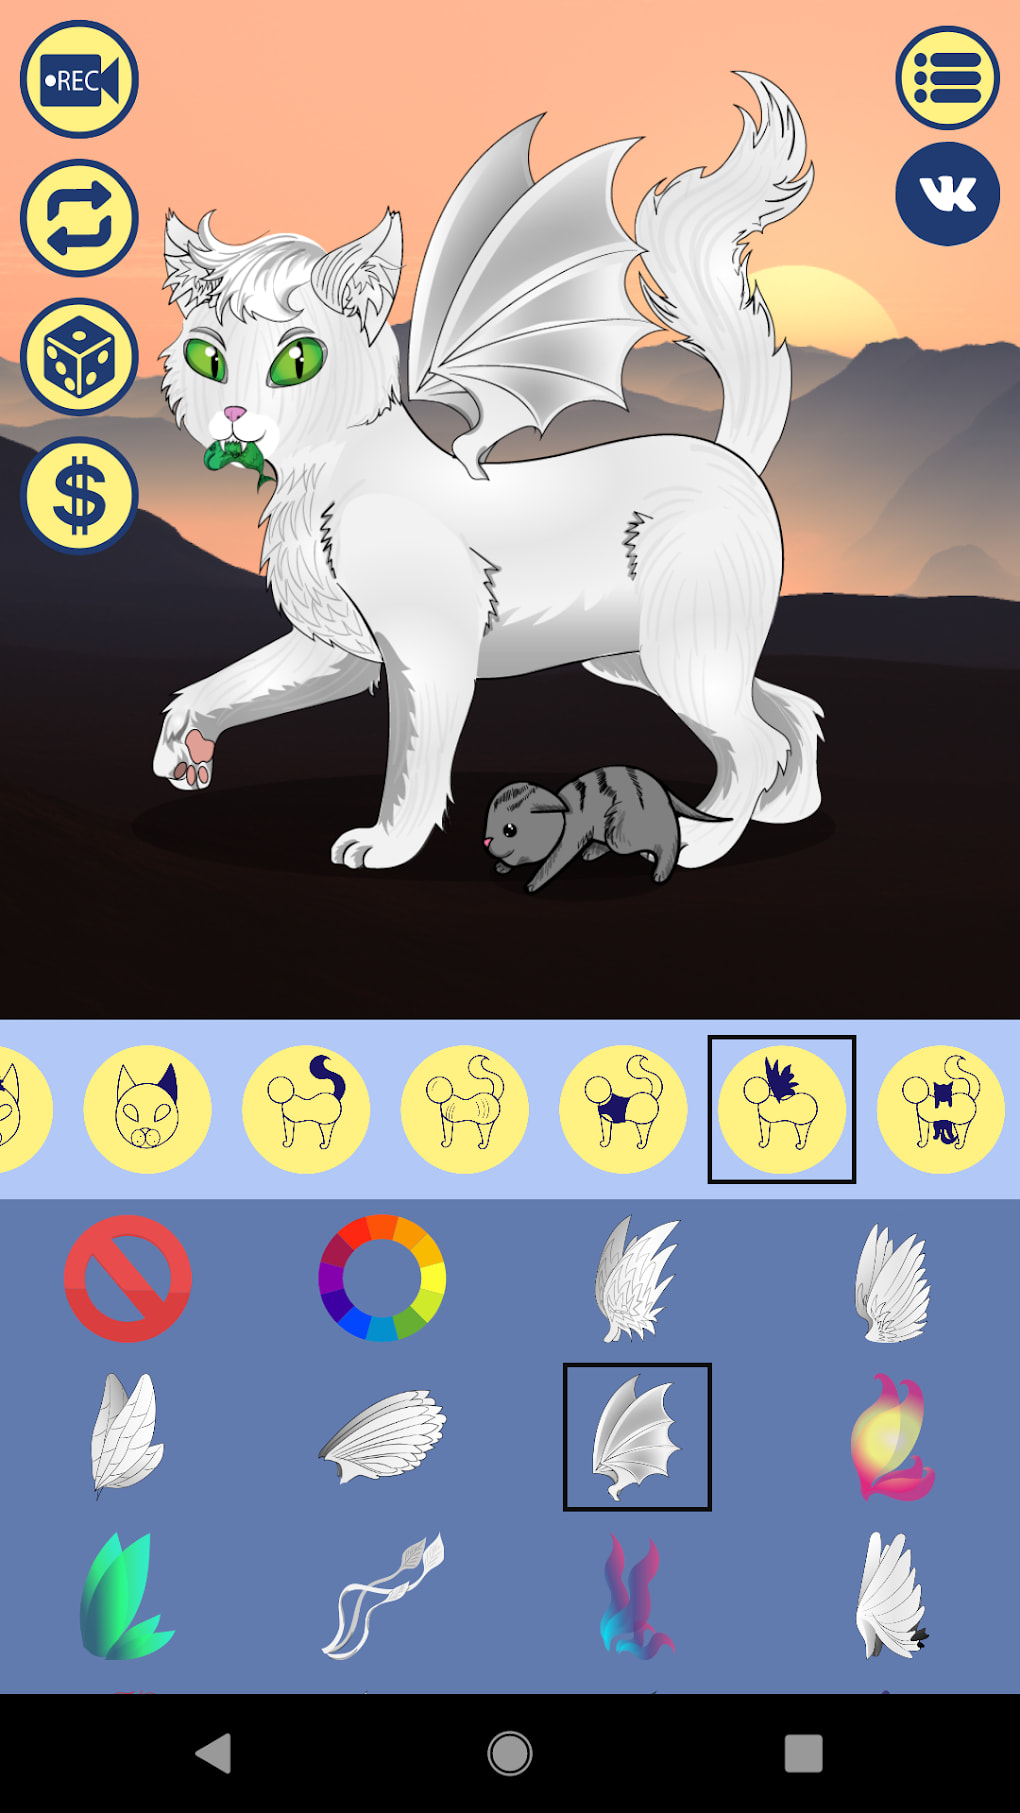 Avatar Maker: Cats 2 for Android - Free App Download